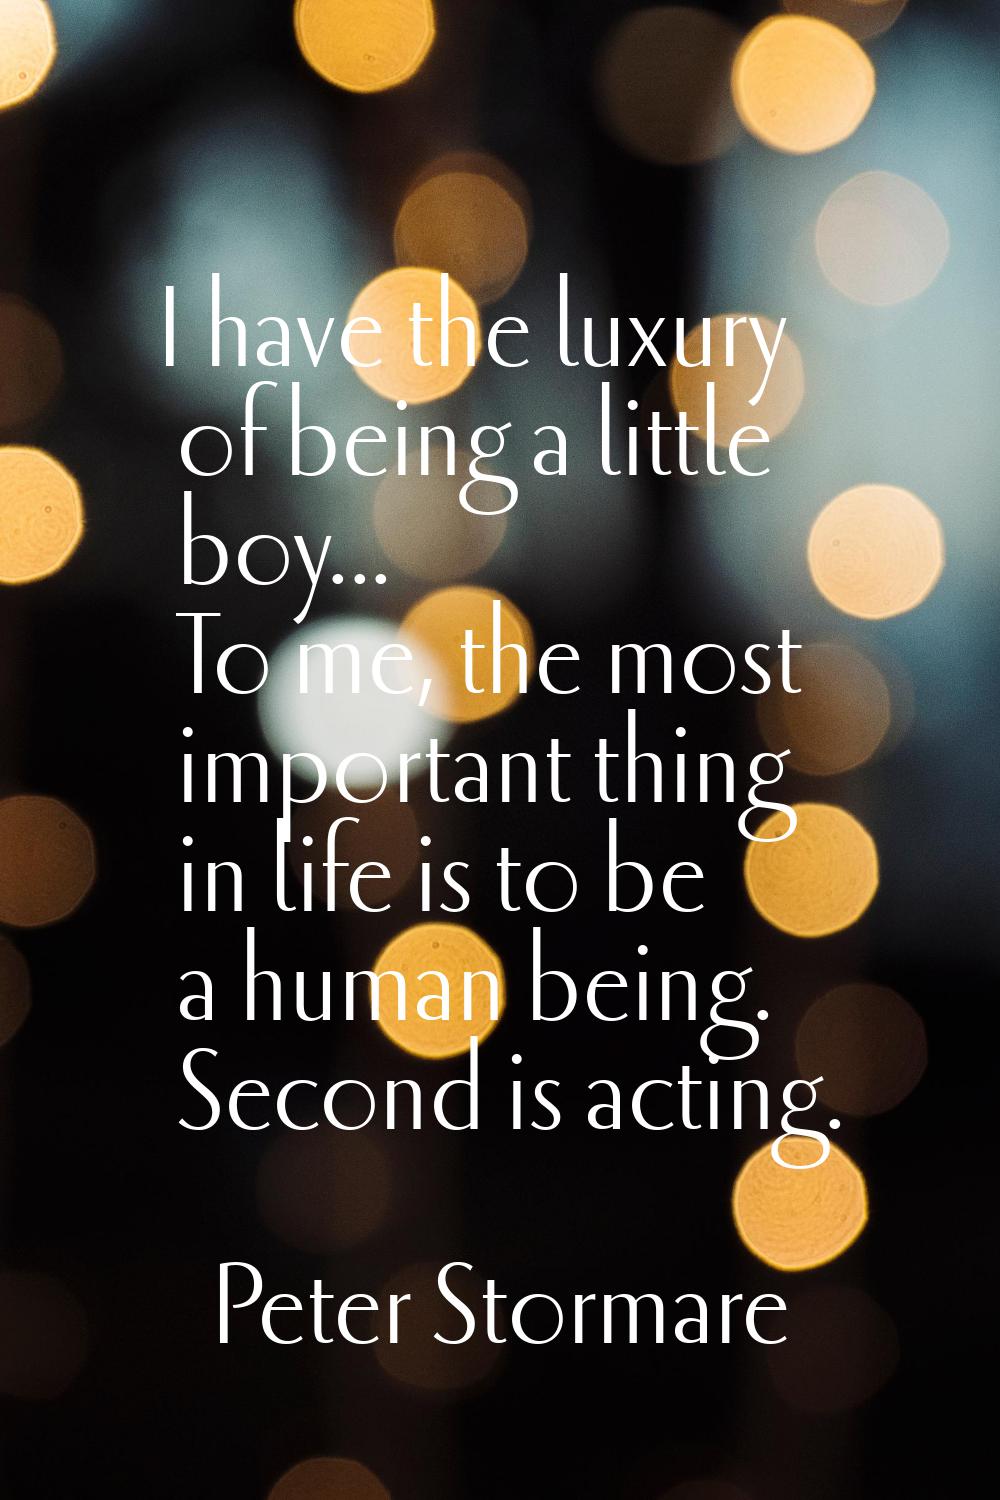 I have the luxury of being a little boy... To me, the most important thing in life is to be a human